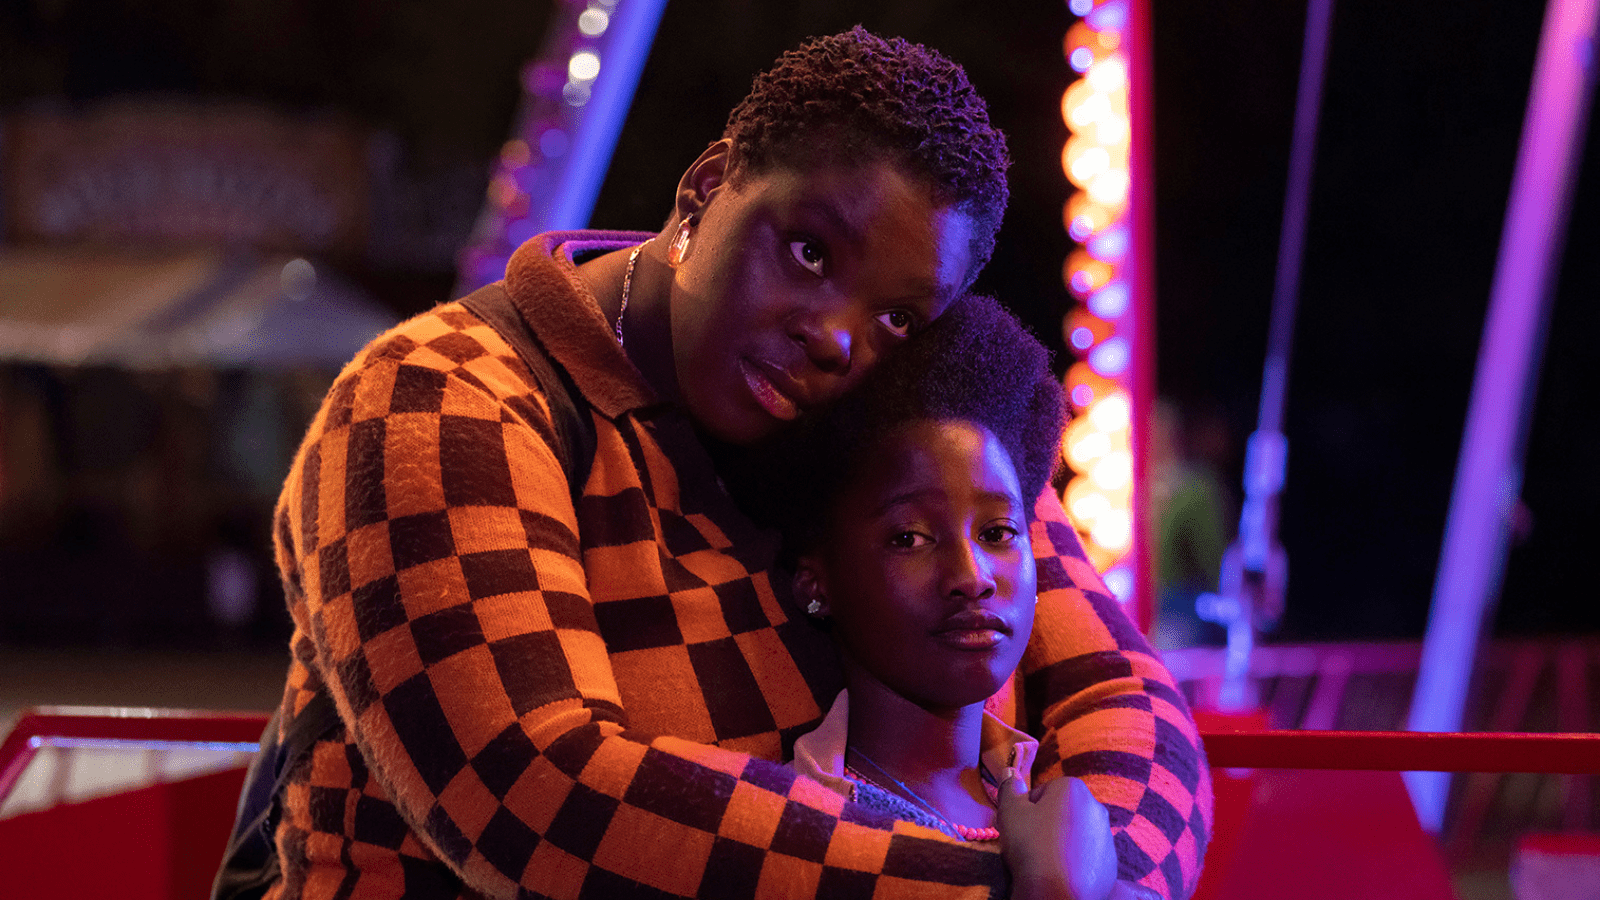 A mother holds a child close as neon lights dance over their faces - the mother is wearing a vibrant patterned shirt.